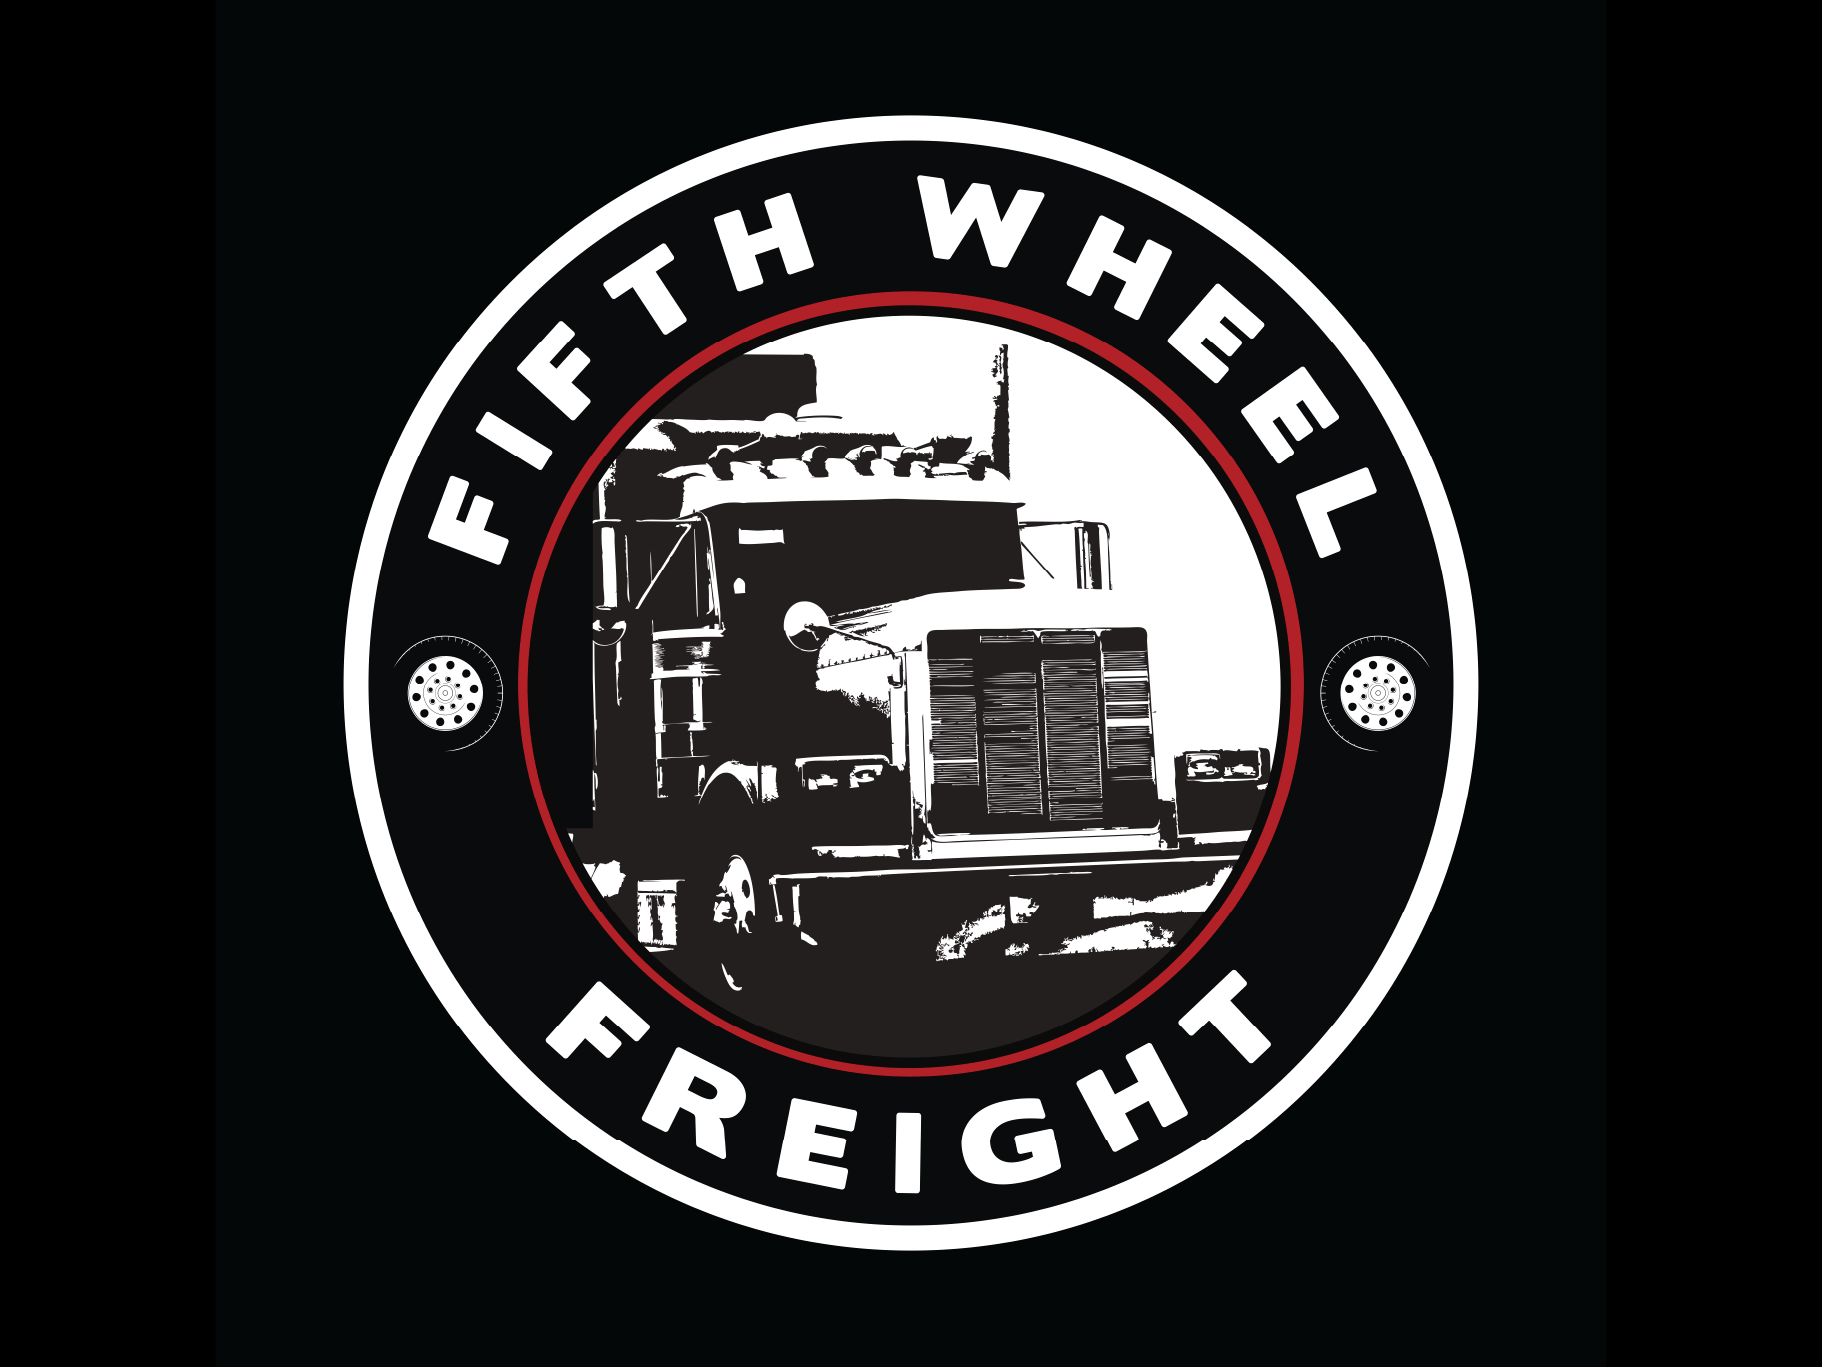 An old school Fifth Wheel Freight logo transitioning to the new FWF logo.